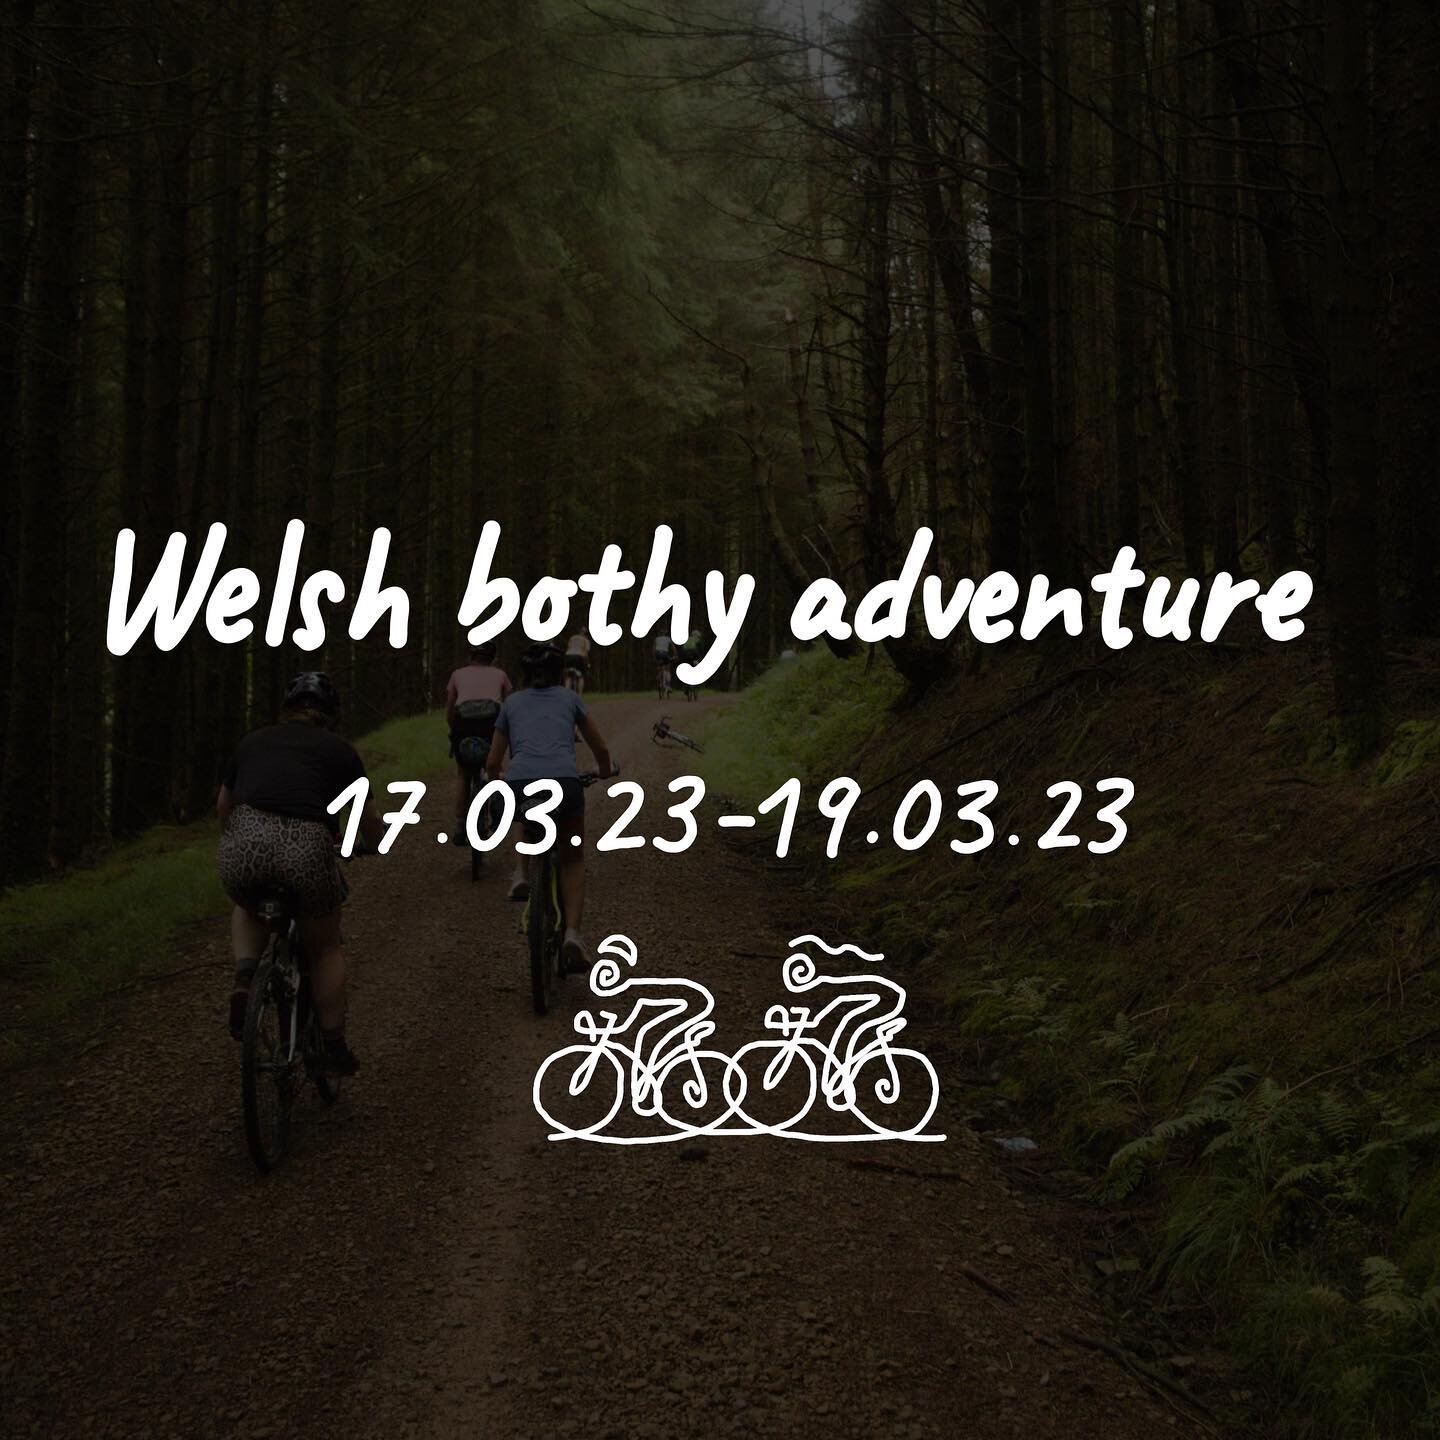 Another trip for March ✨ 

Join @going.pottie for a lovely weekend in the Welsh wilderness! 🏔🌲
The plan is to meet Friday evening, cycle to the bothy (~10km) and spend the night there. Saturday will be spent on the bike enjoying beautiful landscape